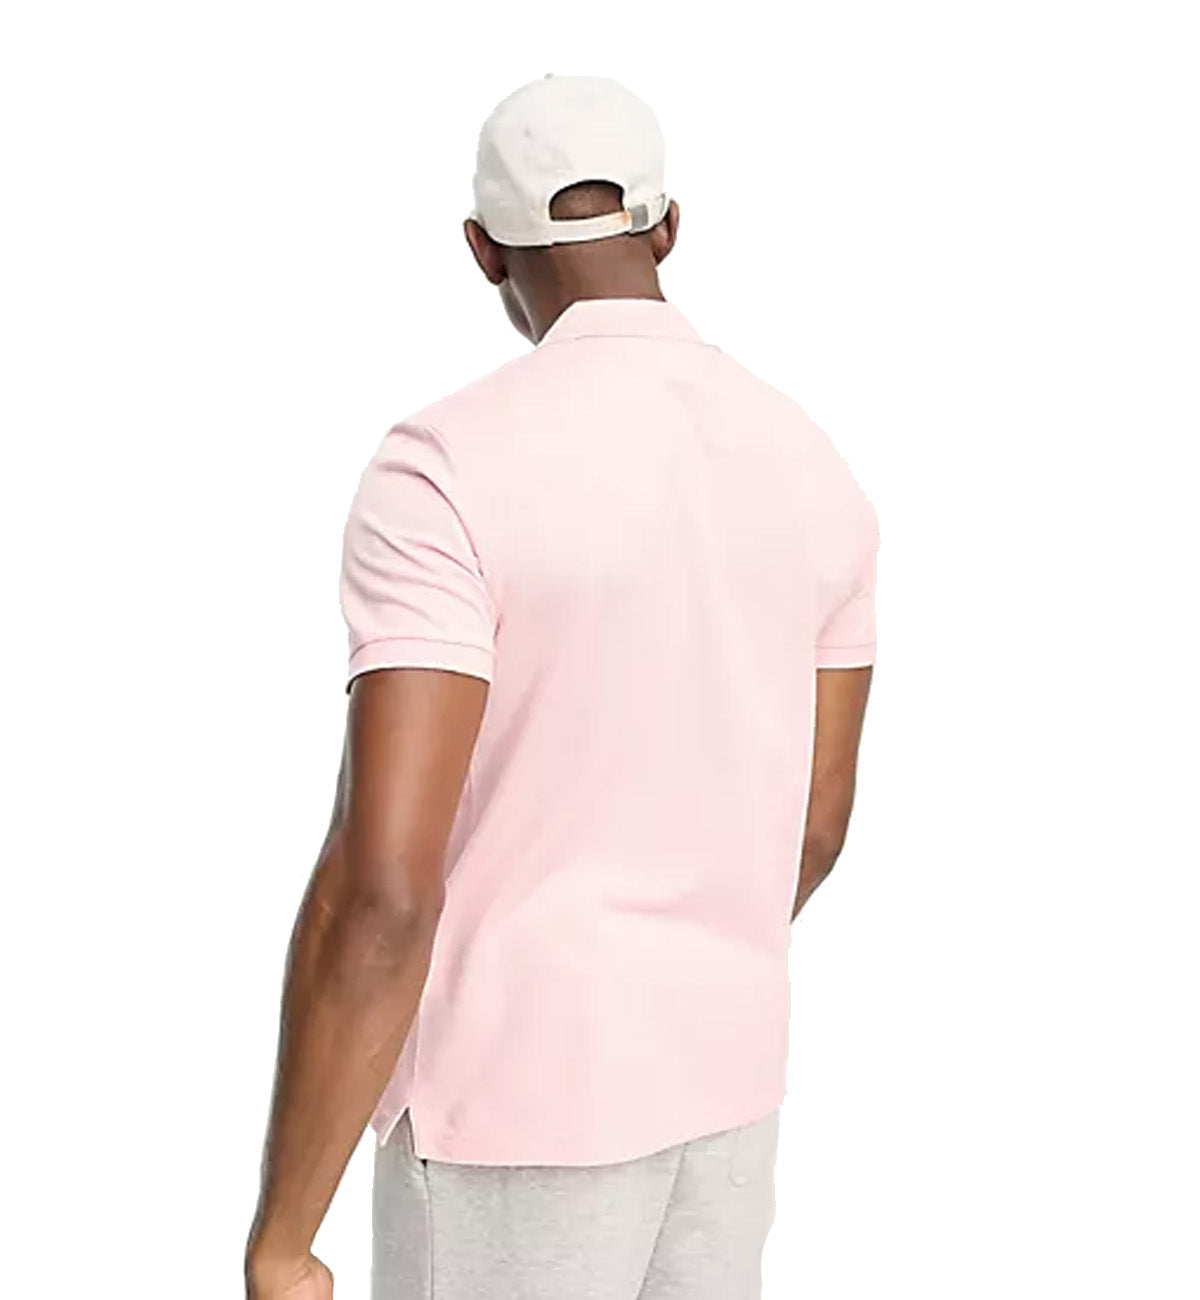 Lacoste Classic Fit Cotton Polo Shirt (Pink)